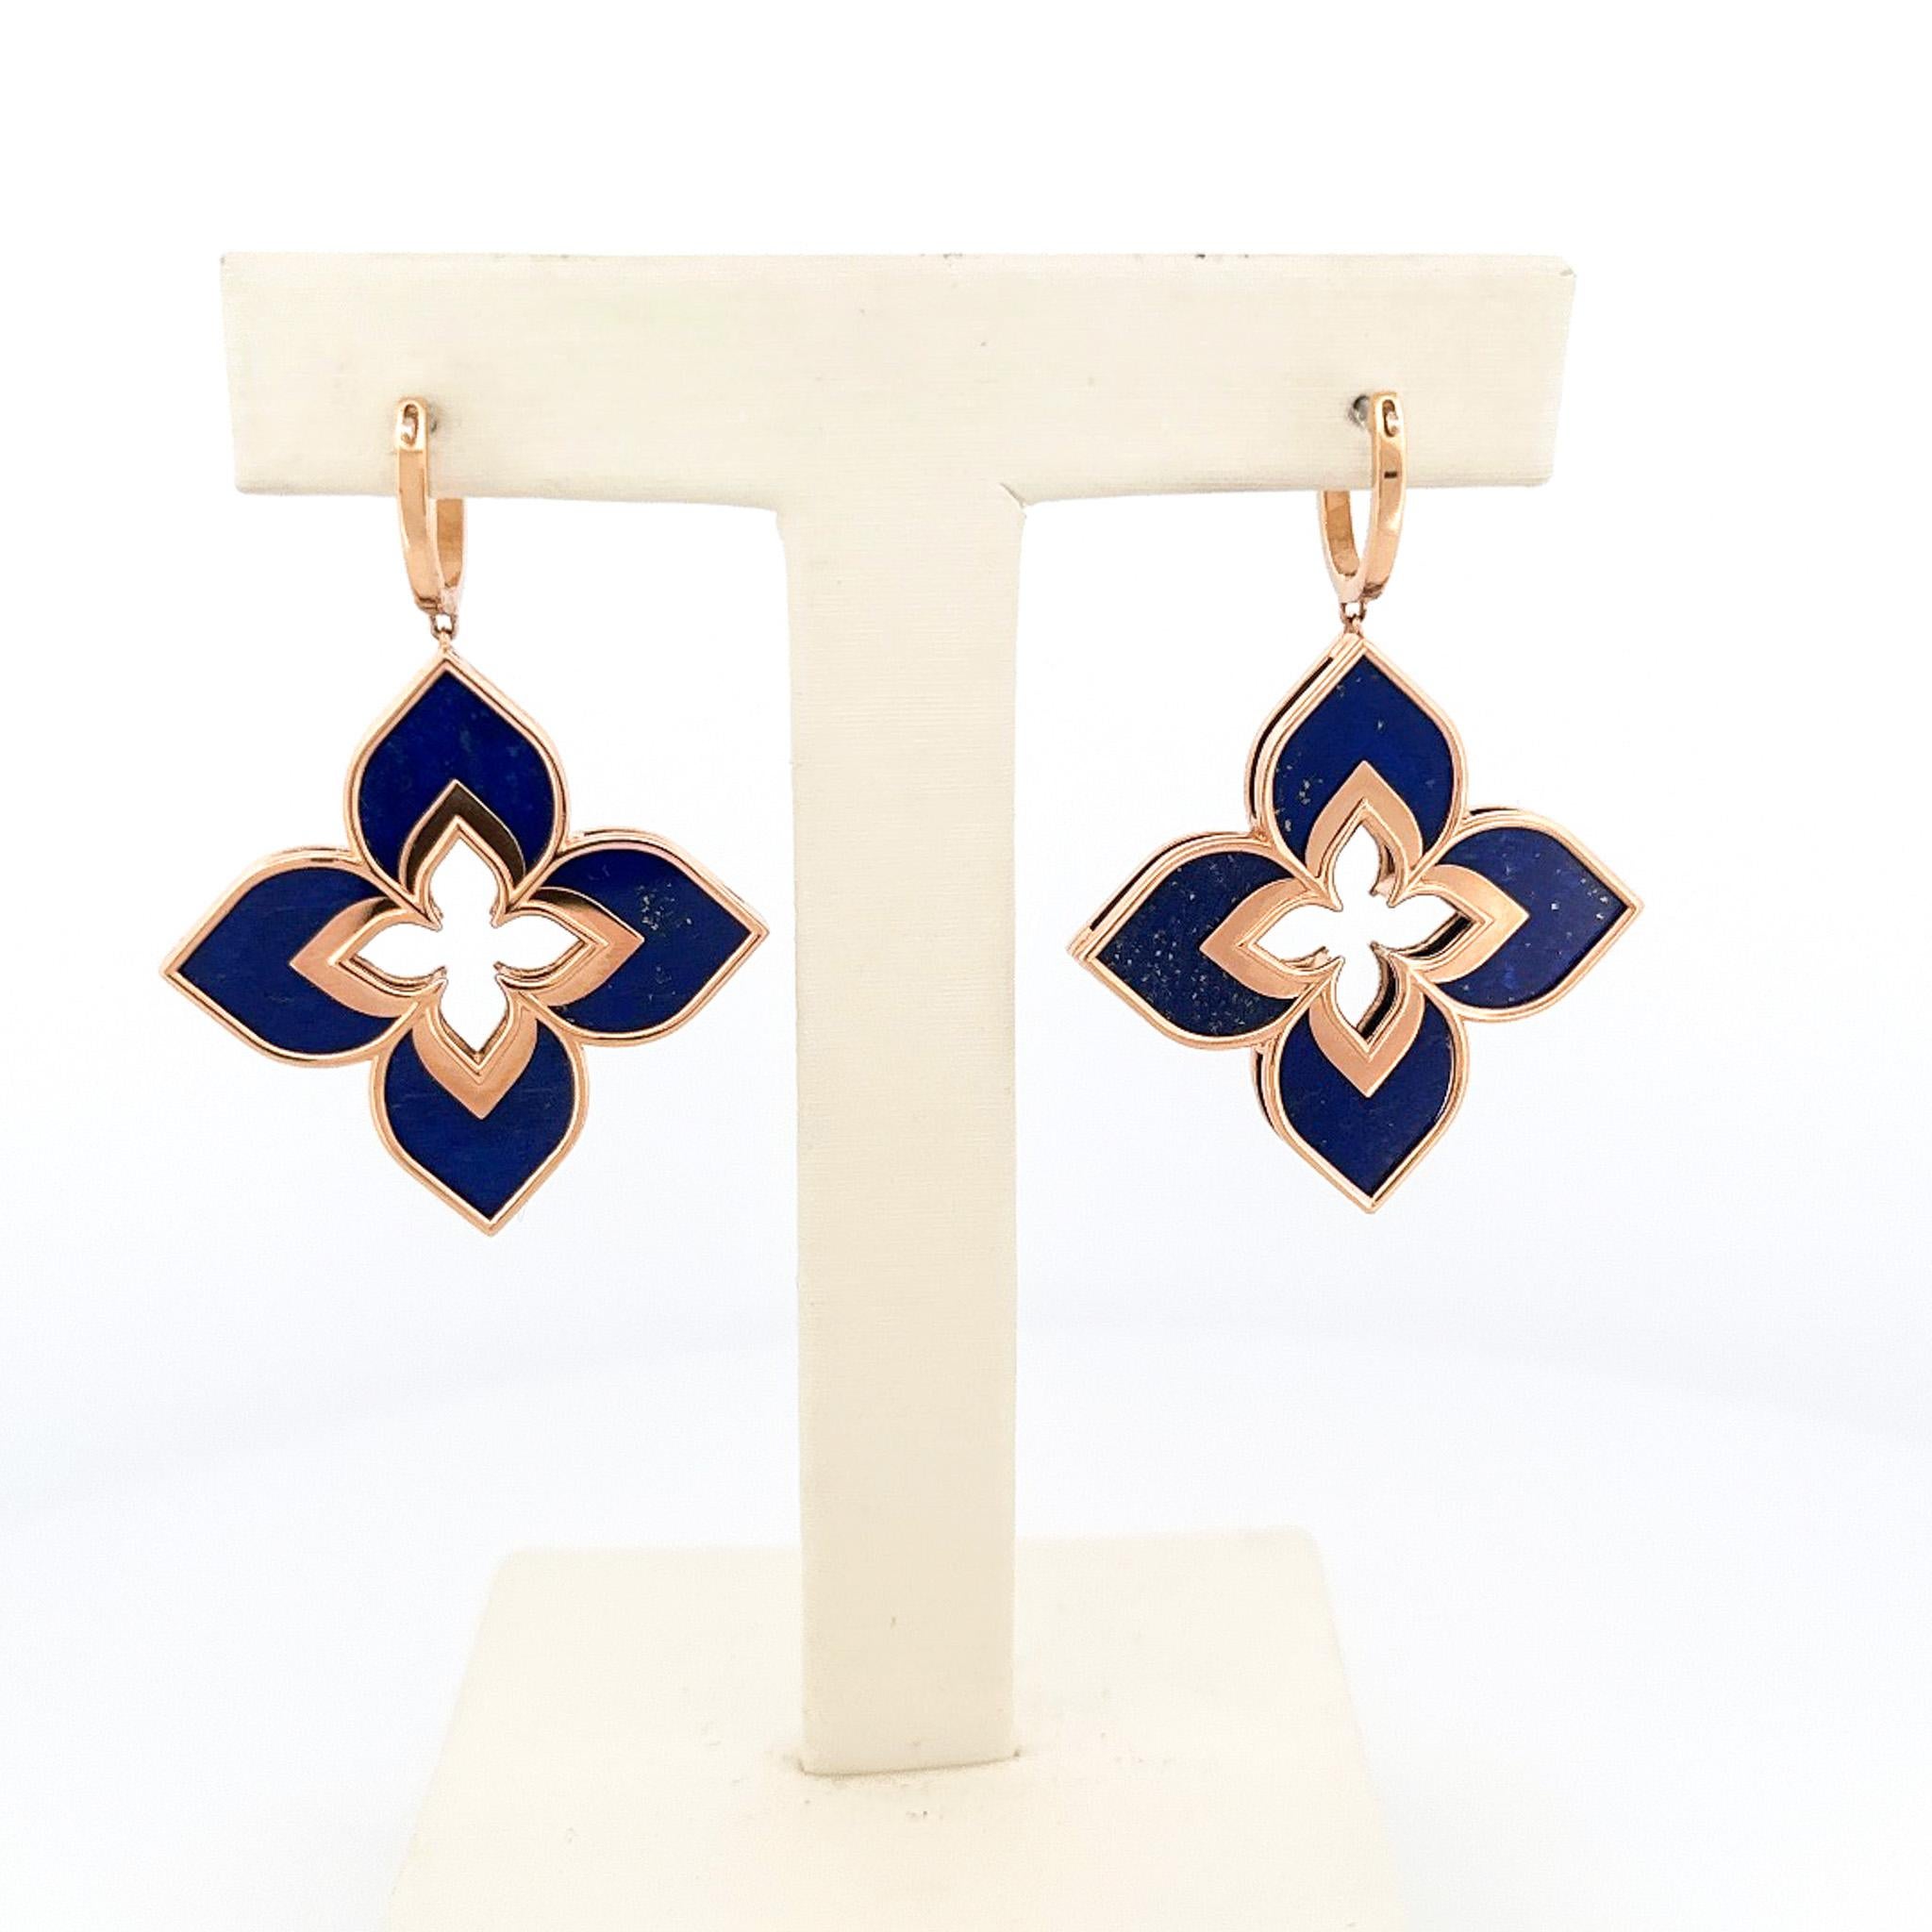 From designer Roberto Coin's Venetian Princess Collection, 18 karat rose gold lapis and diamond earrings. These earrings are crafted with 144 round brilliant cut diamonds with a total combined weight of 0.25 carats. These diamonds have H color and